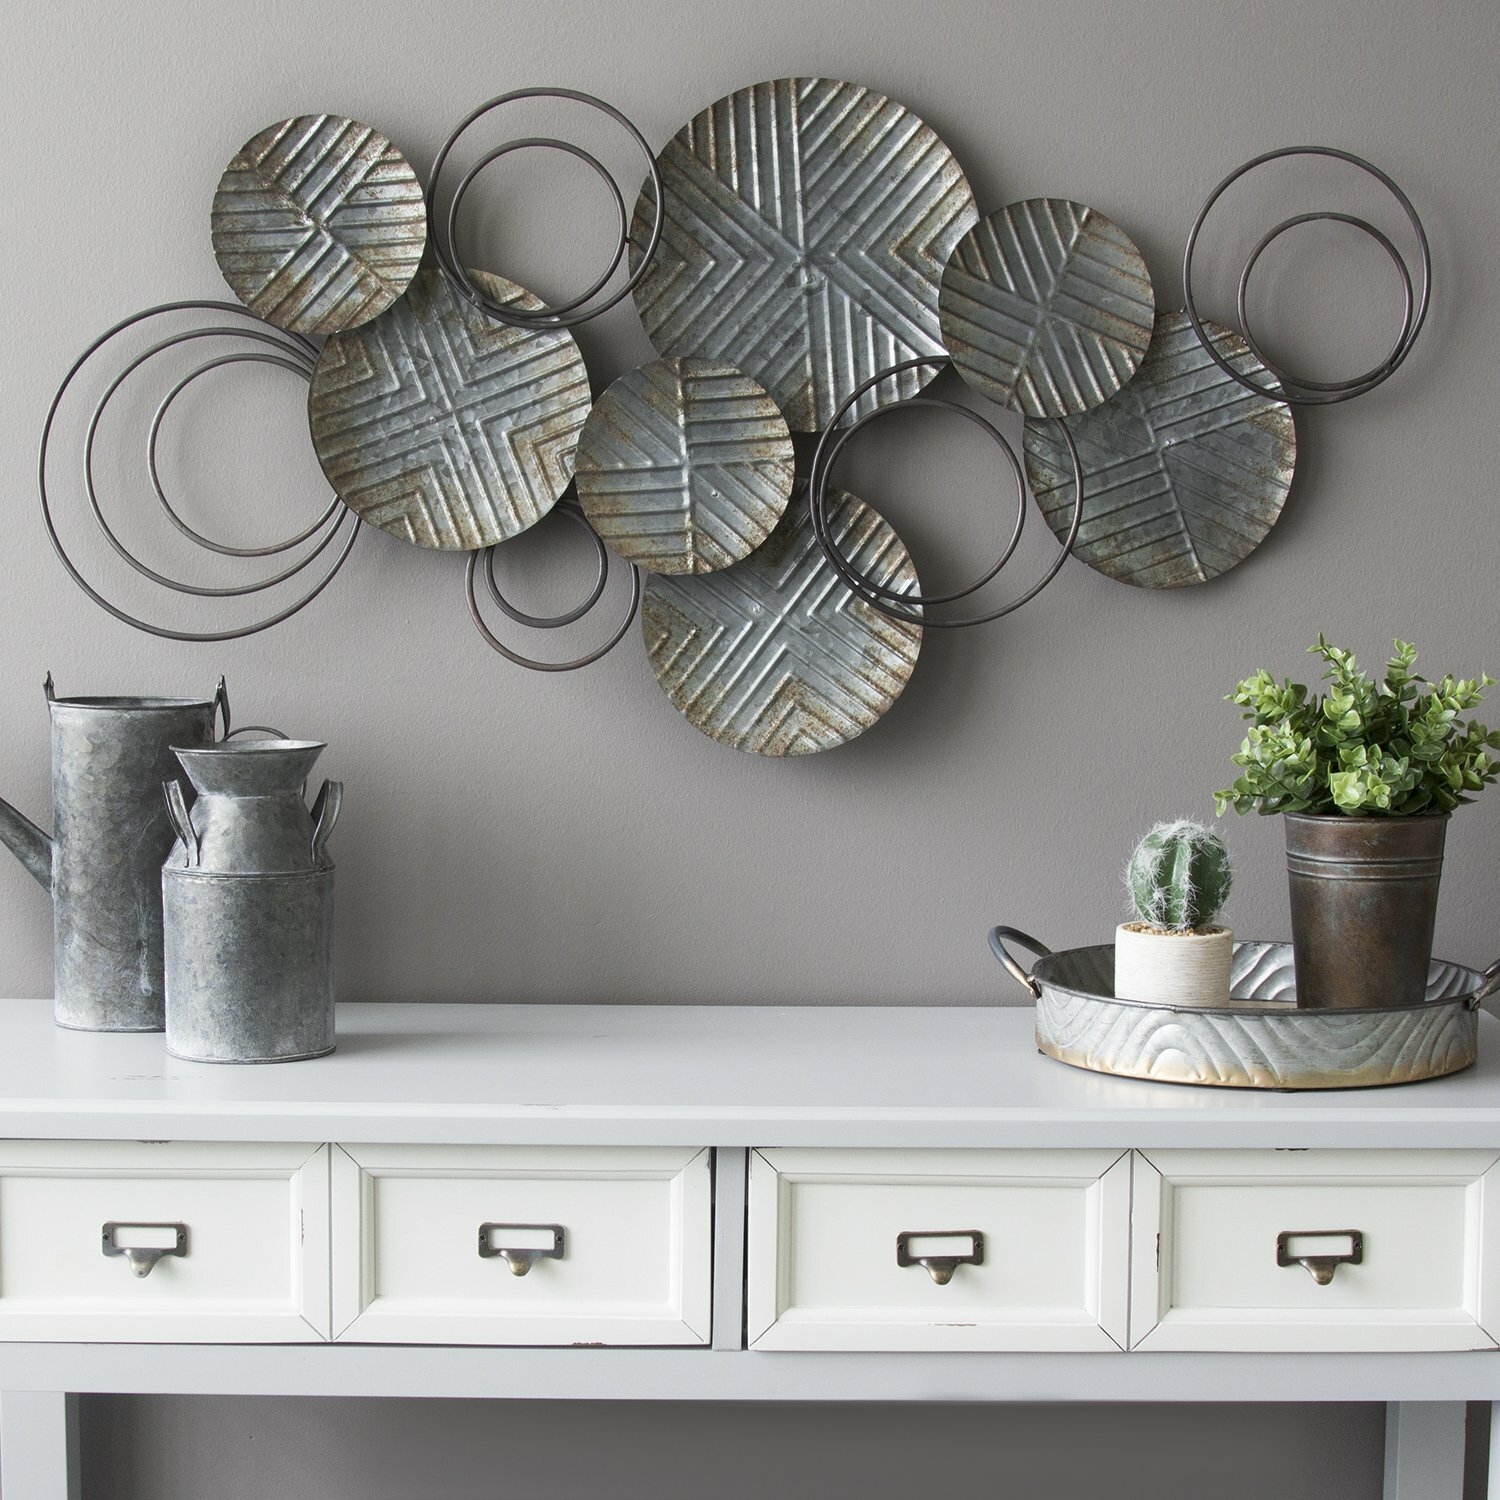 50+ Decorative Plates To Hang On Wall You'll Love in 2020 - Visual Hunt